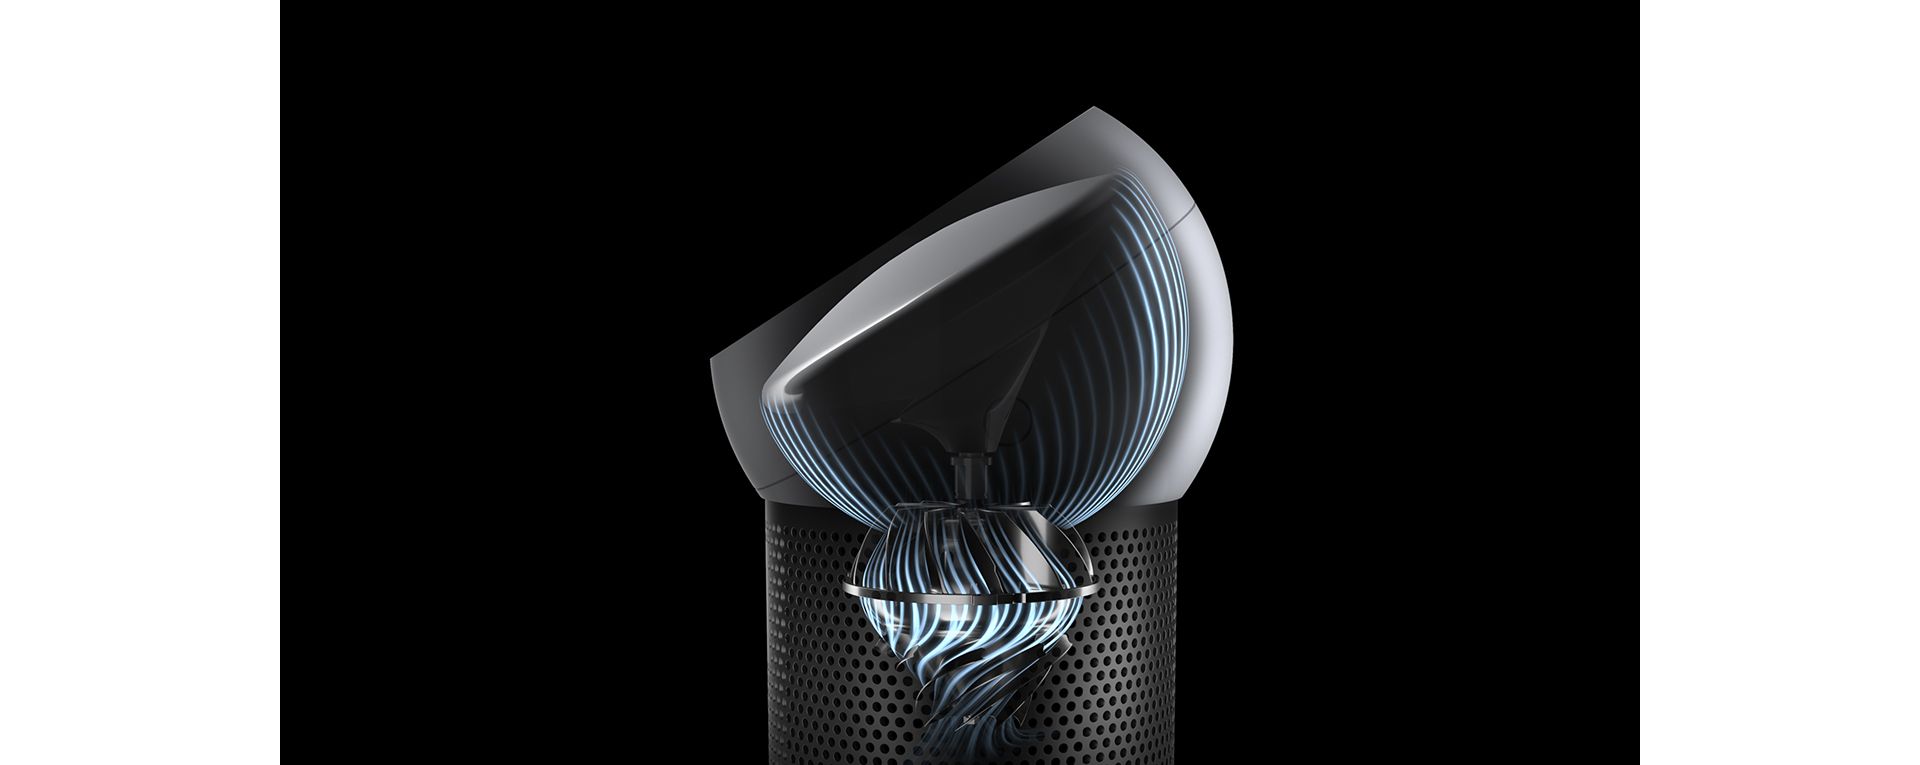 Airflow travels through the Dyson personal purifier fan's apertures, on each side of the convex dome